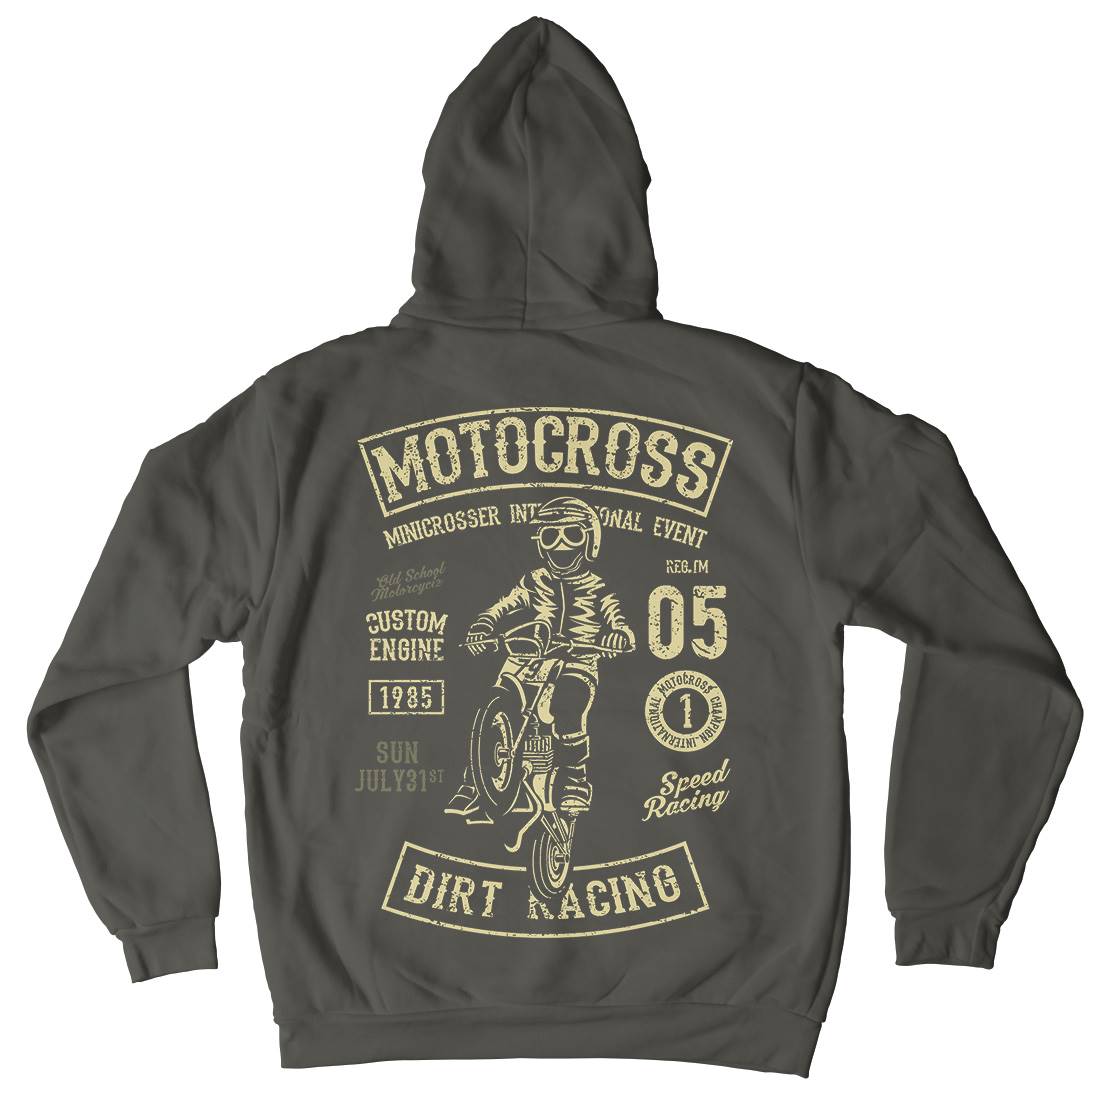 Moto Cross Mens Hoodie With Pocket Motorcycles A089